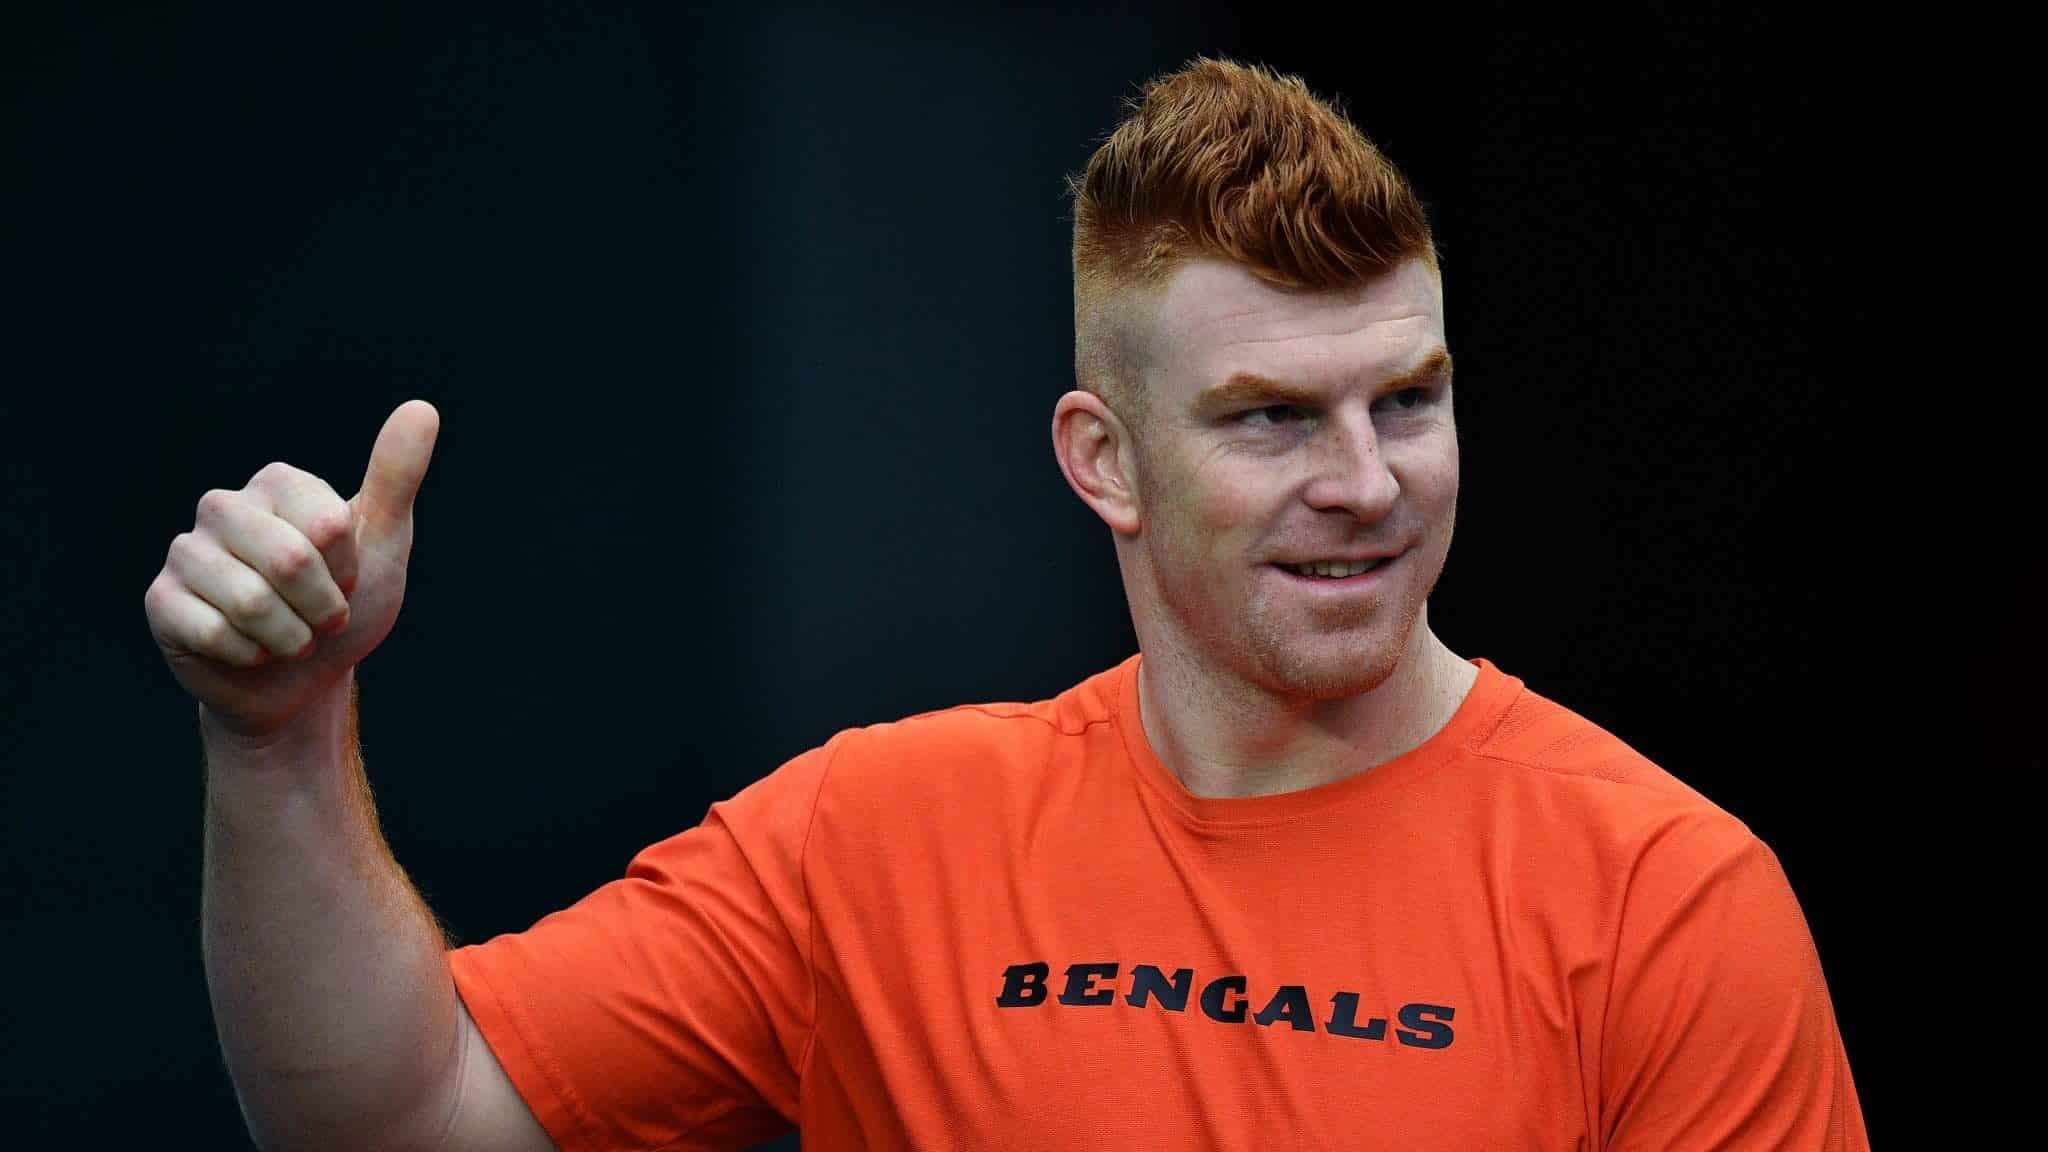 MIAMI, FLORIDA - DECEMBER 22: Andy Dalton #14 of the Cincinnati Bengals gestures to the fans prior to the game against the Miami Dolphins at Hard Rock Stadium on December 22, 2019 in Miami, Florida.